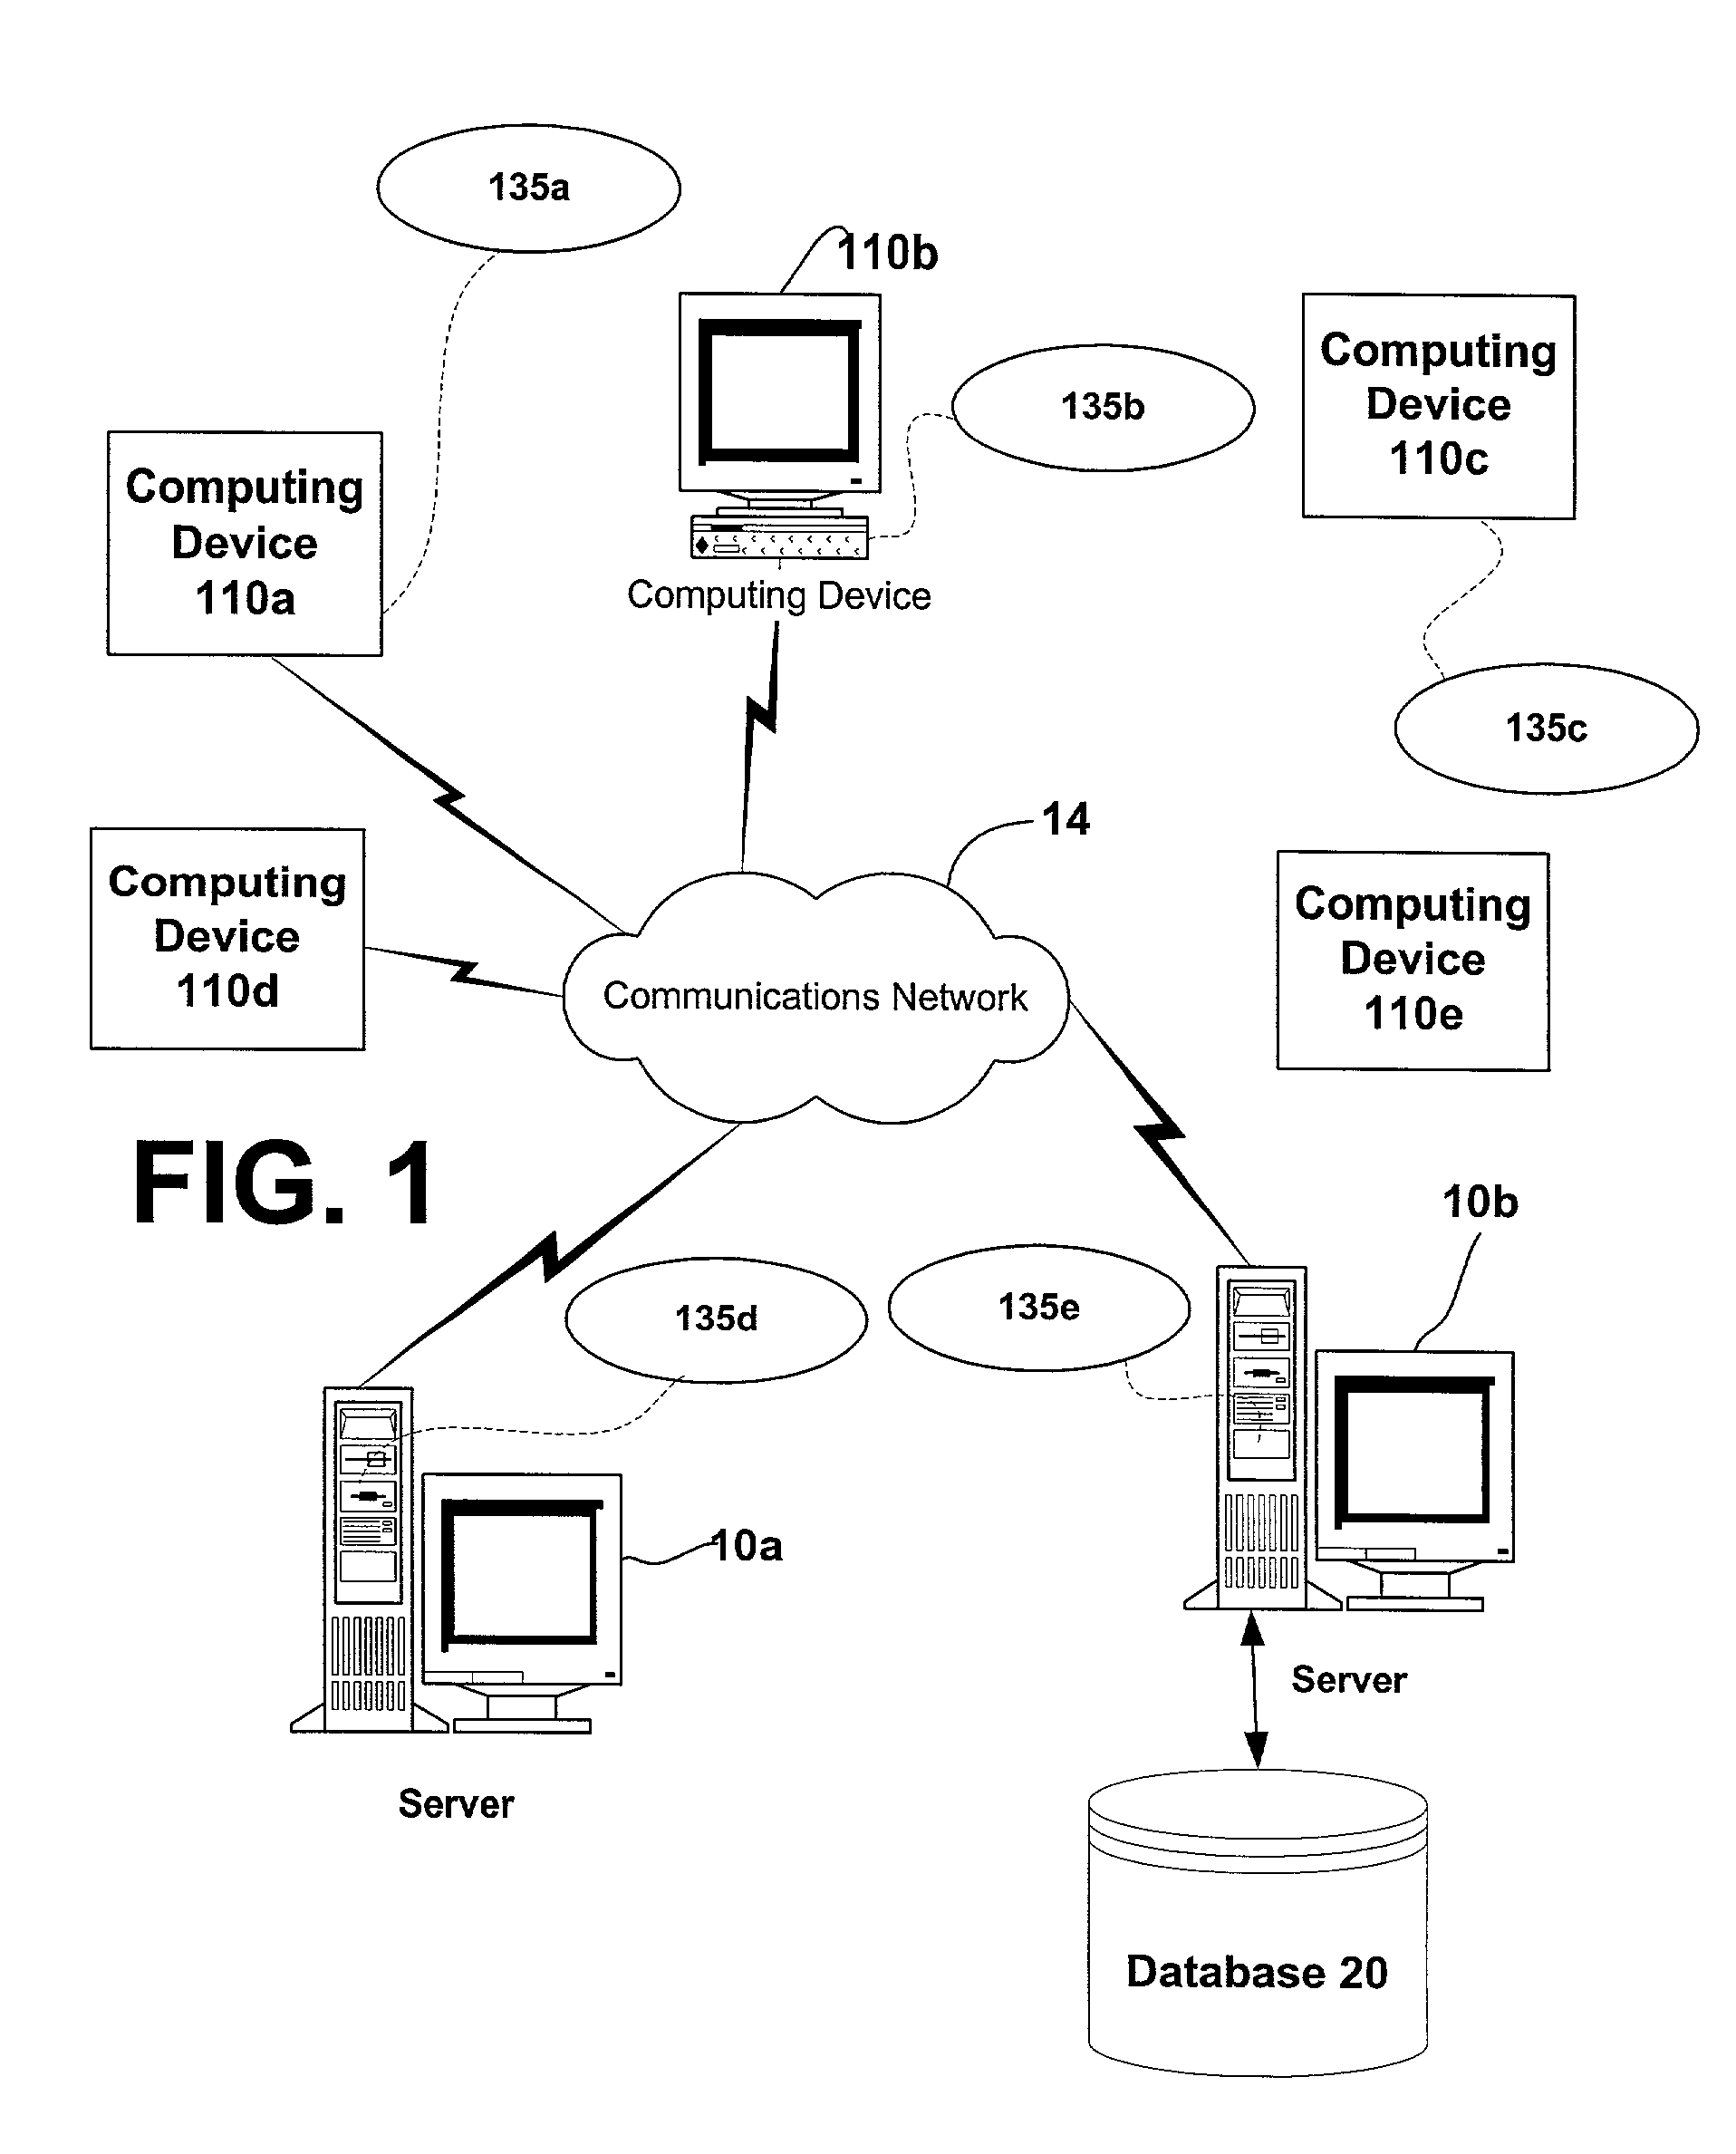 System and methods for providing versioning of software components in a computer programming language